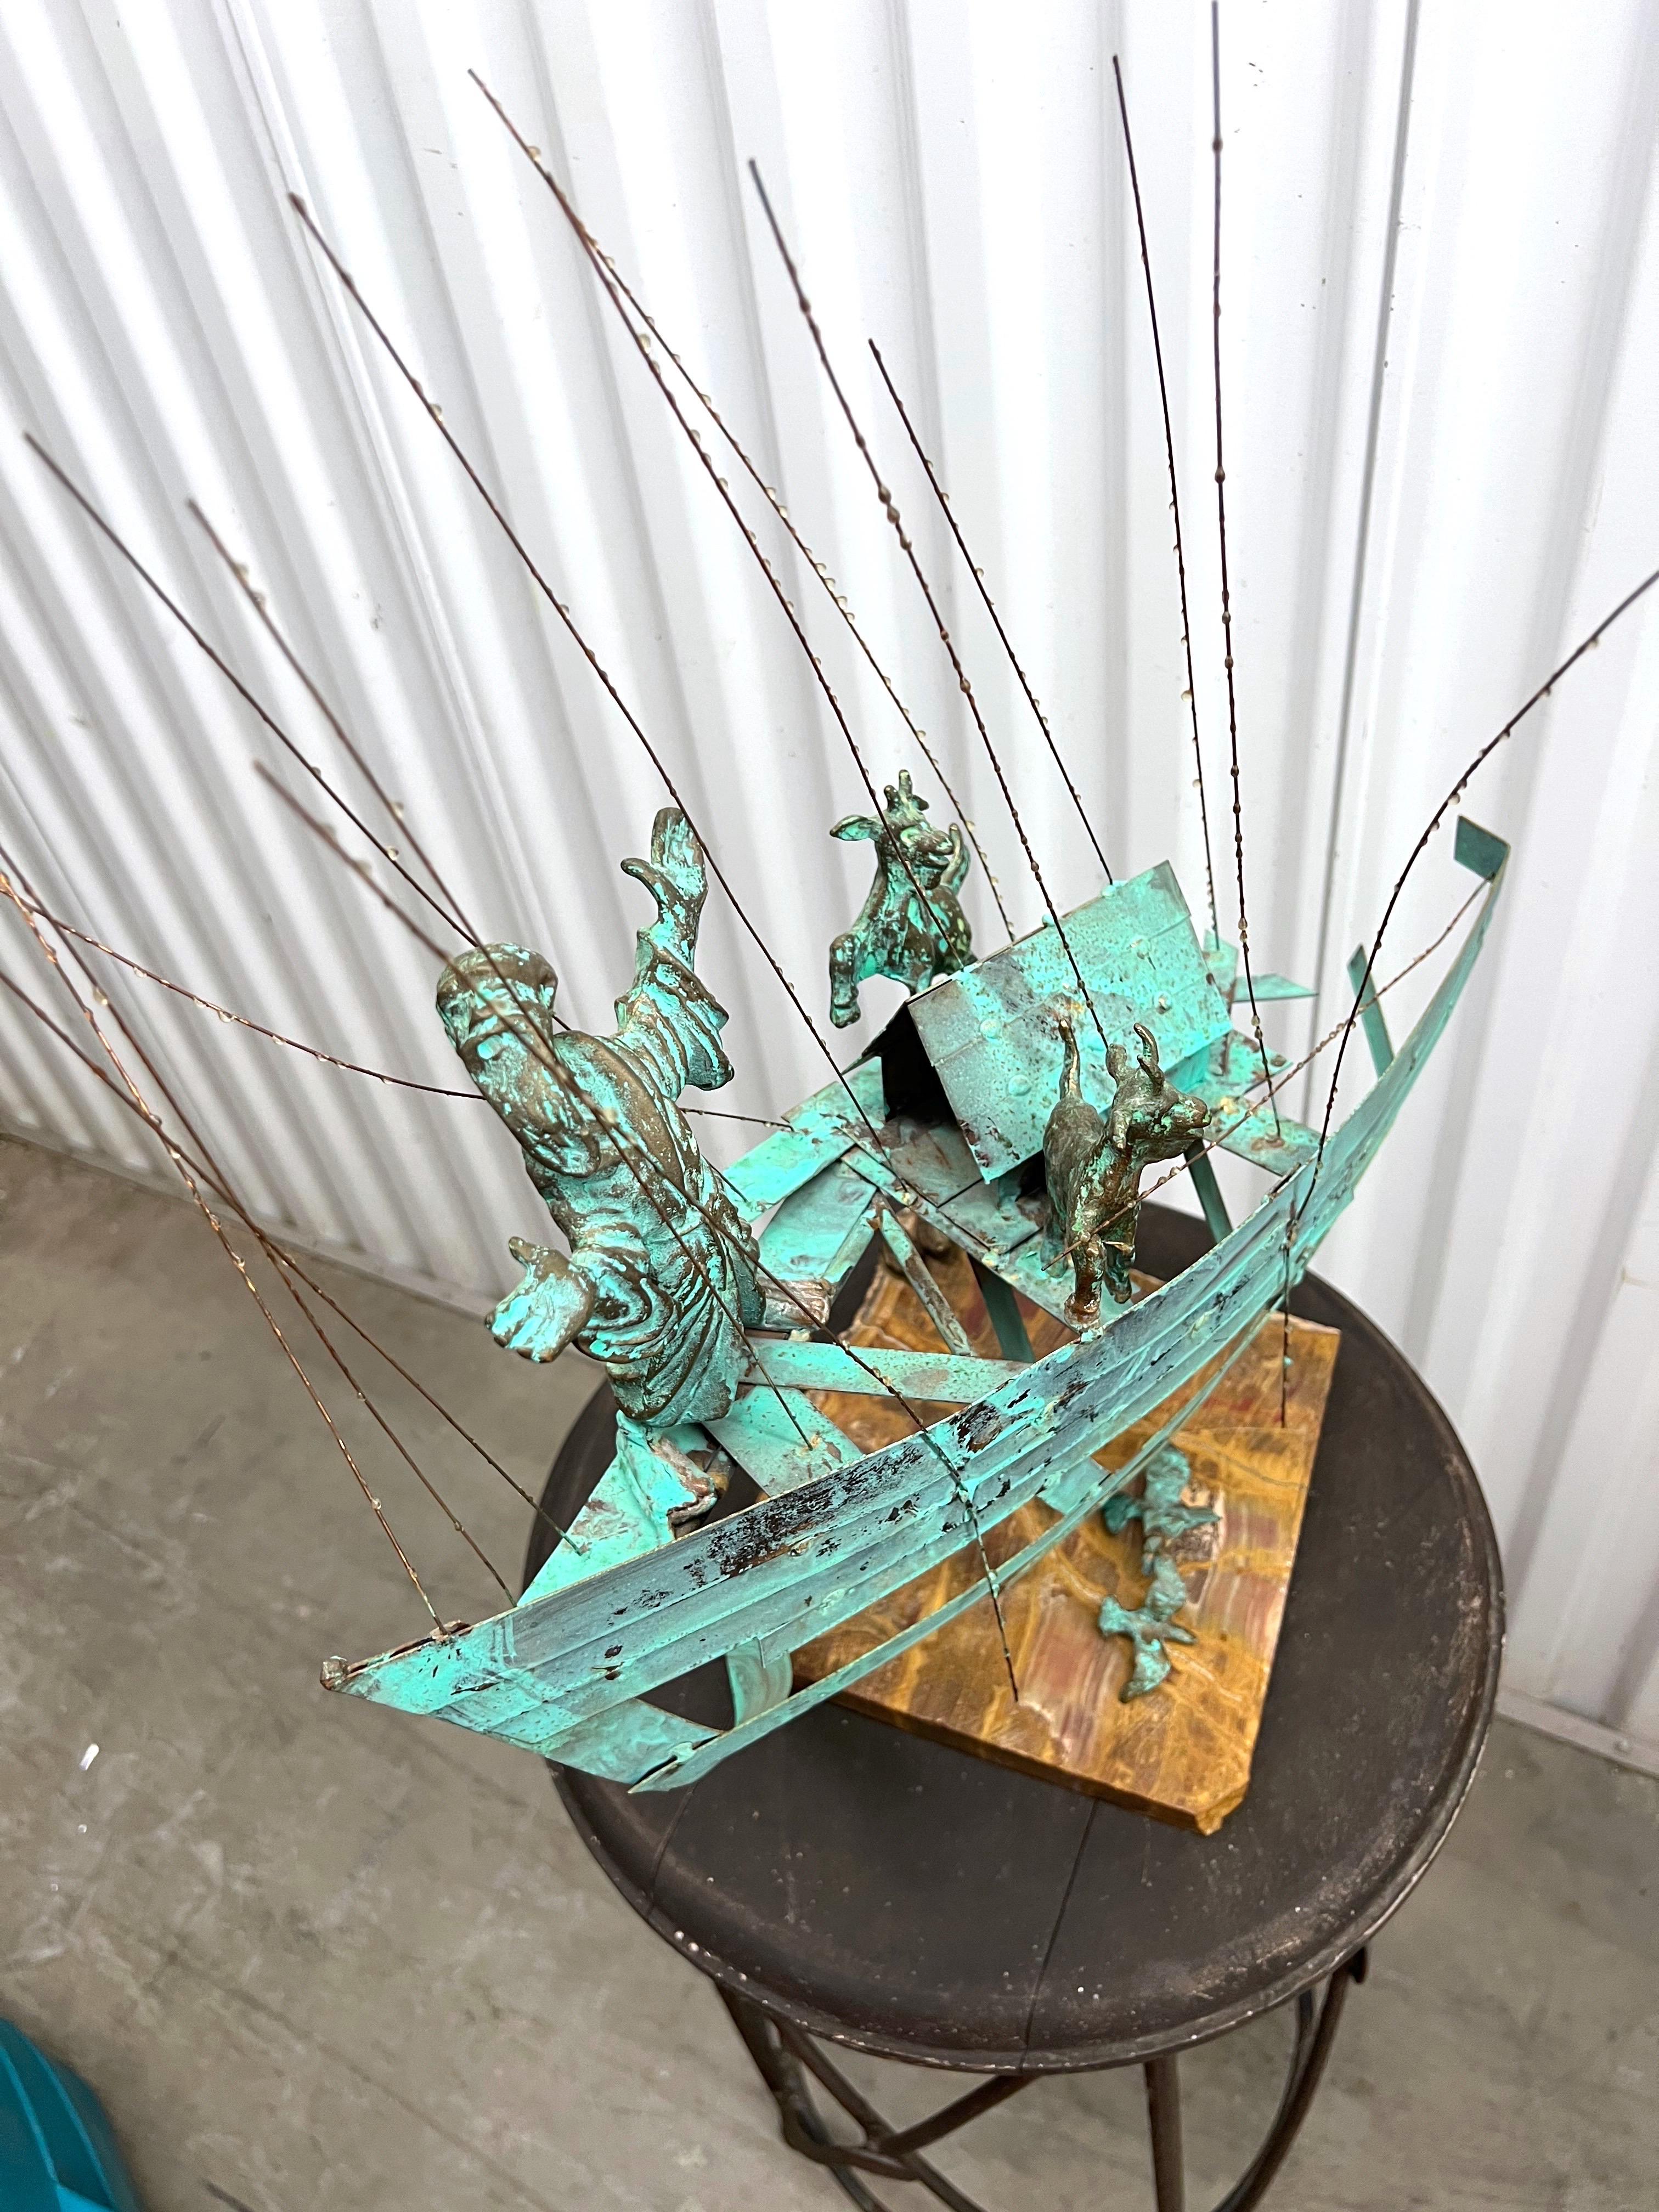 Bijan Signed Metal Art Sculpture of Man on Boat with Goats For Sale 2